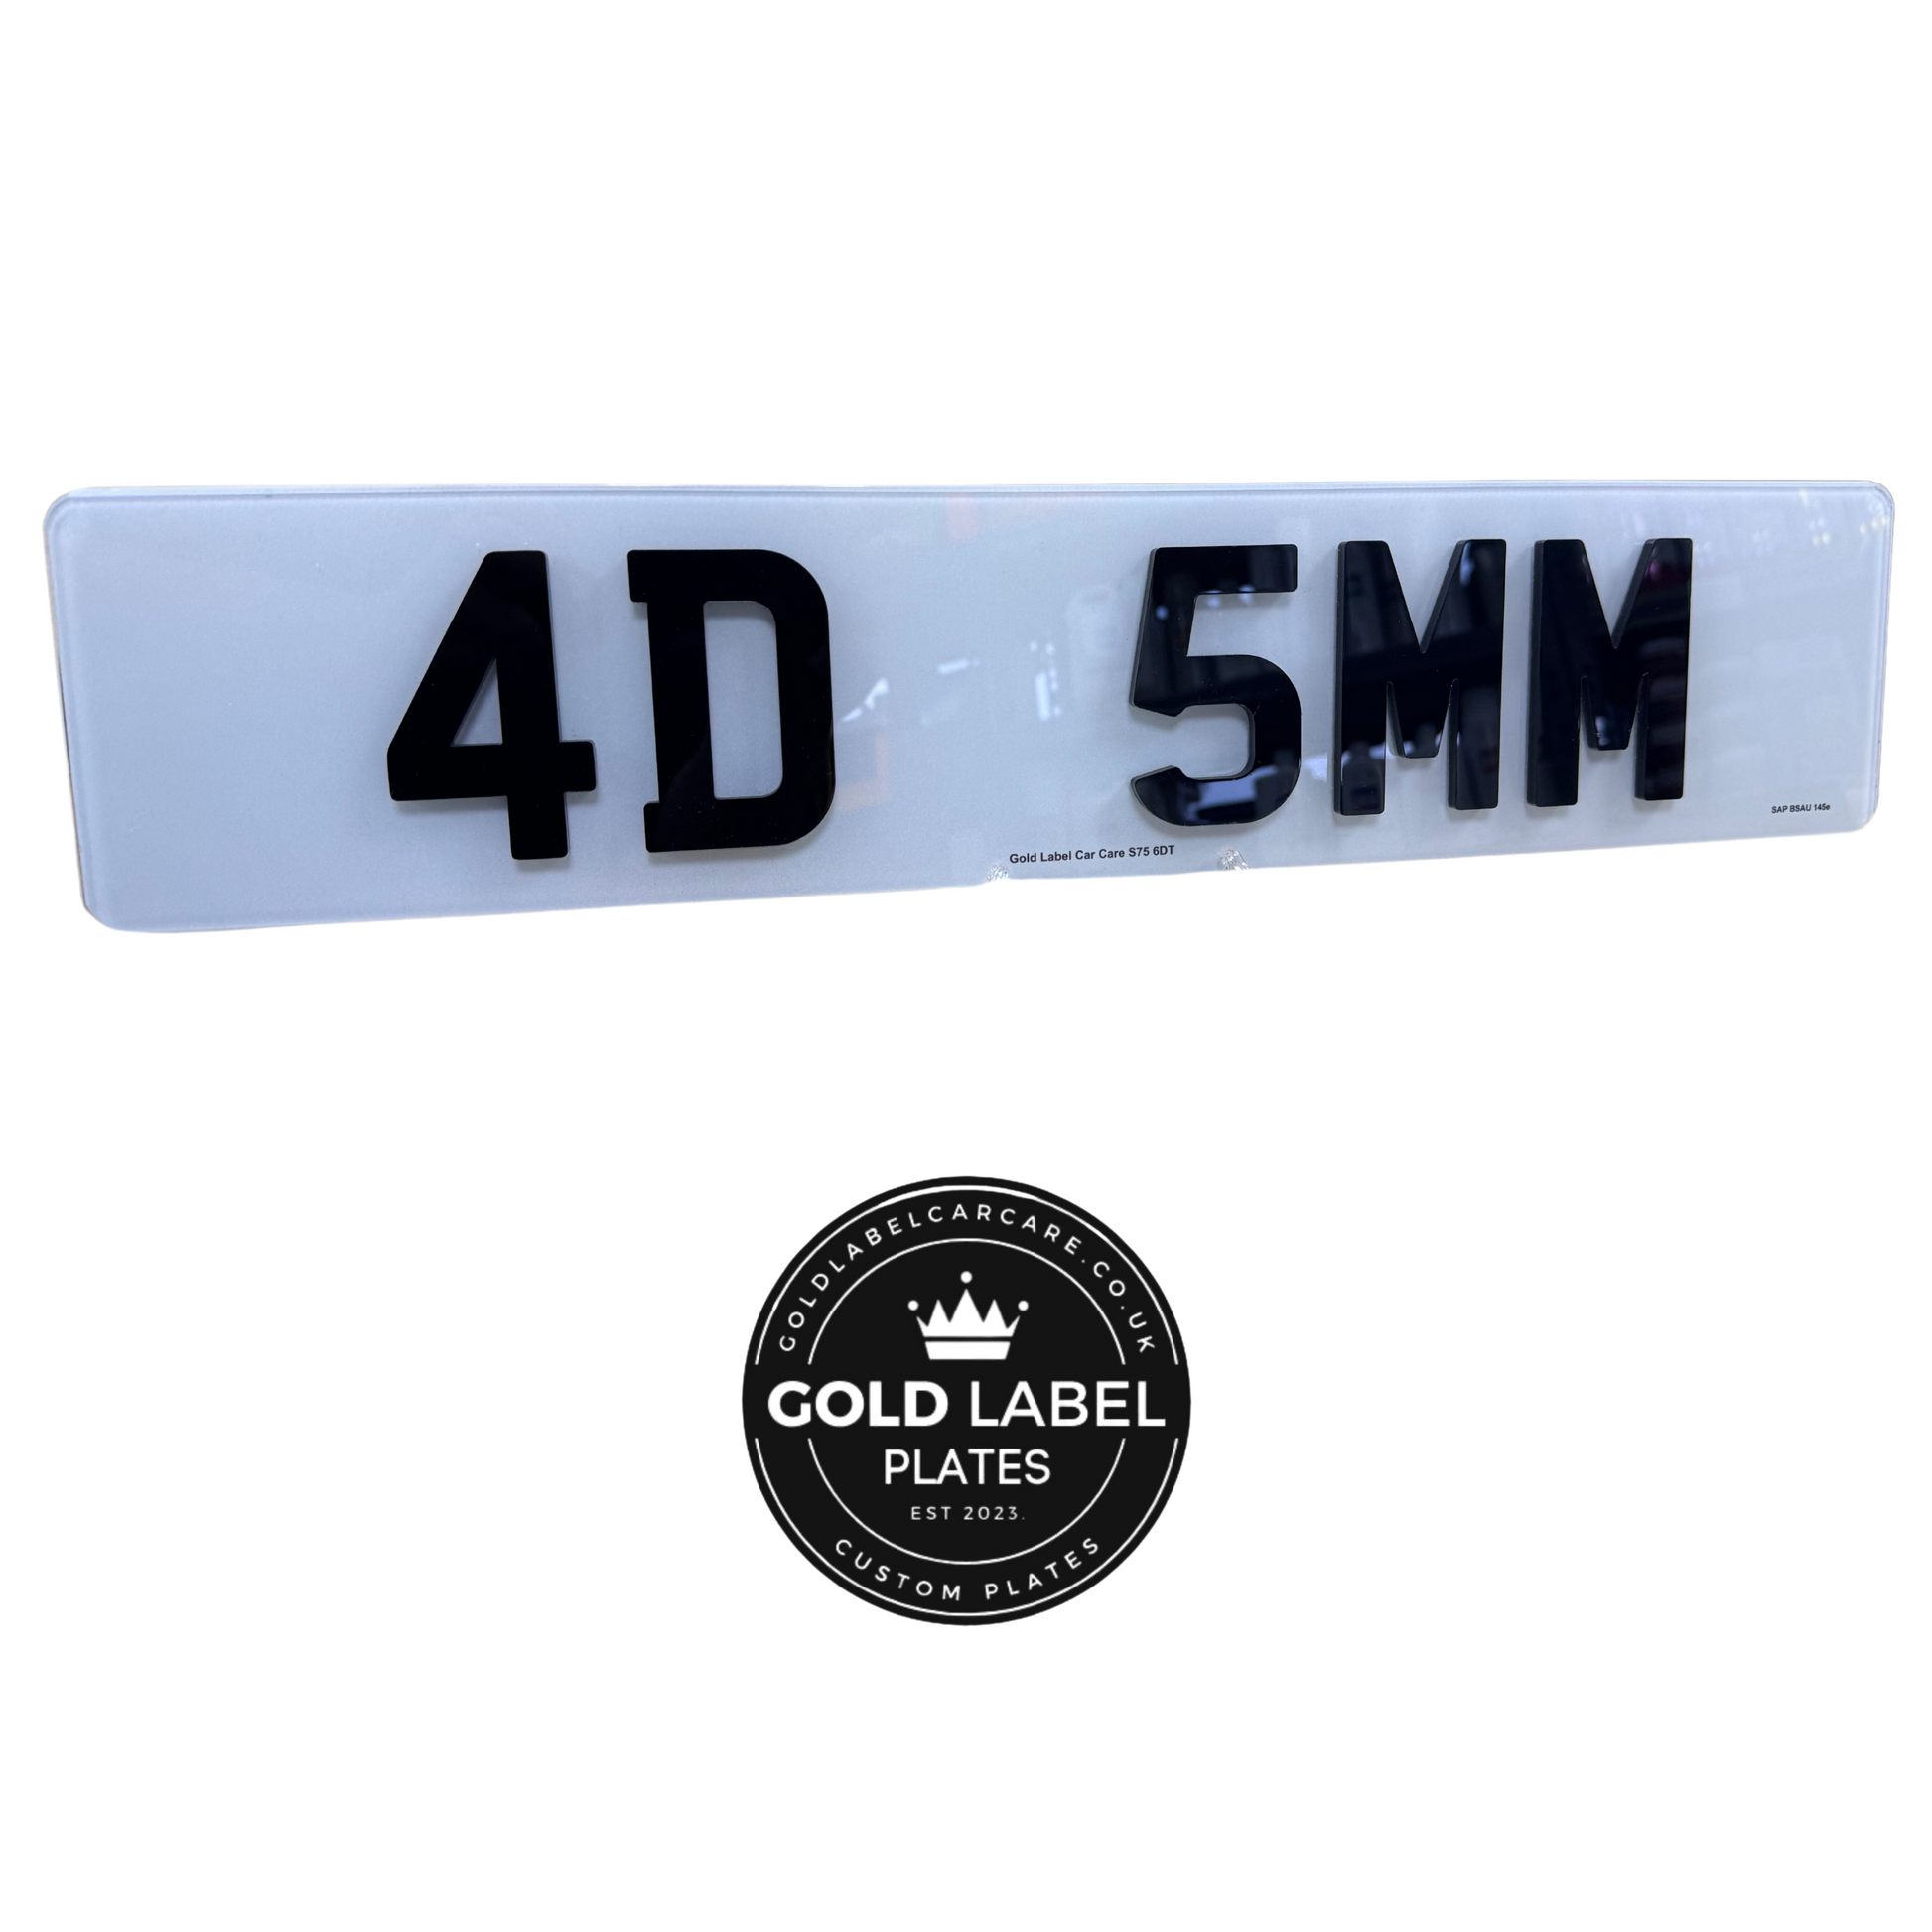 4D 5MM Number Plate. Barnsley South Yorkshire